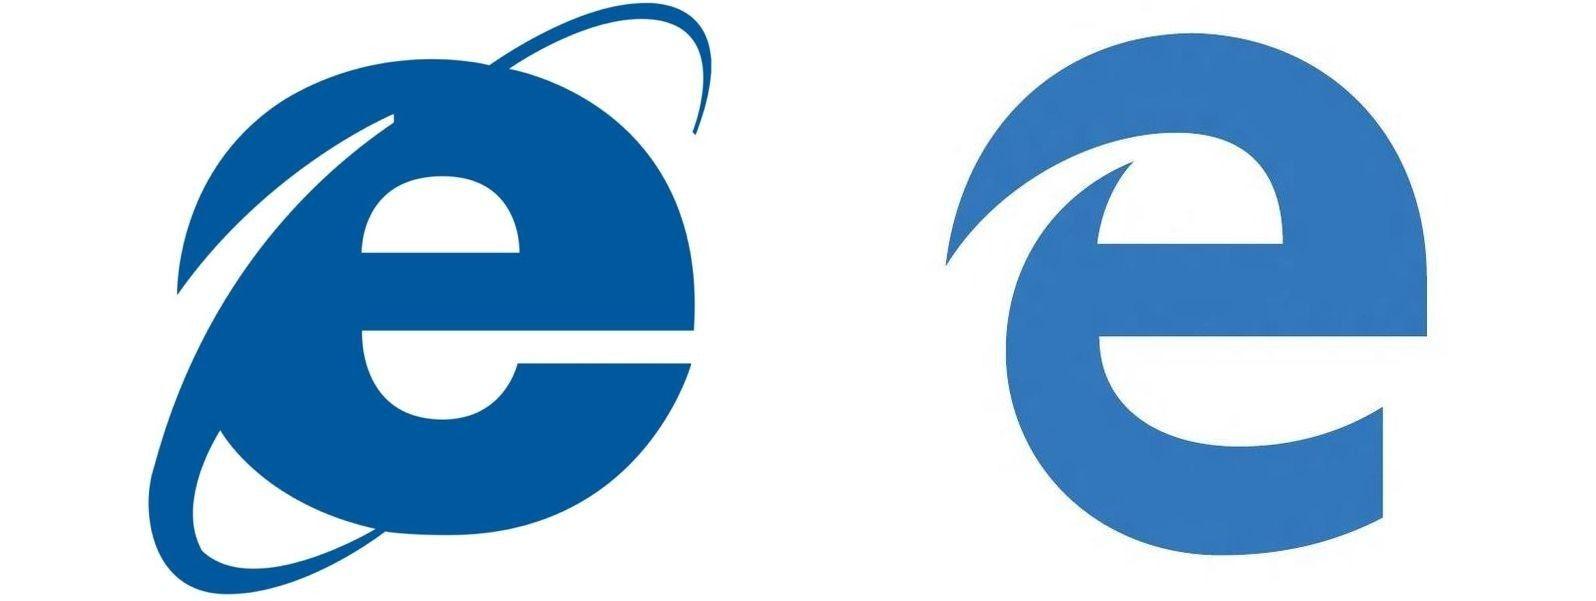 Internet Web Browser Logo - The logo for the Microsoft Edge web browser looks very familiar ...